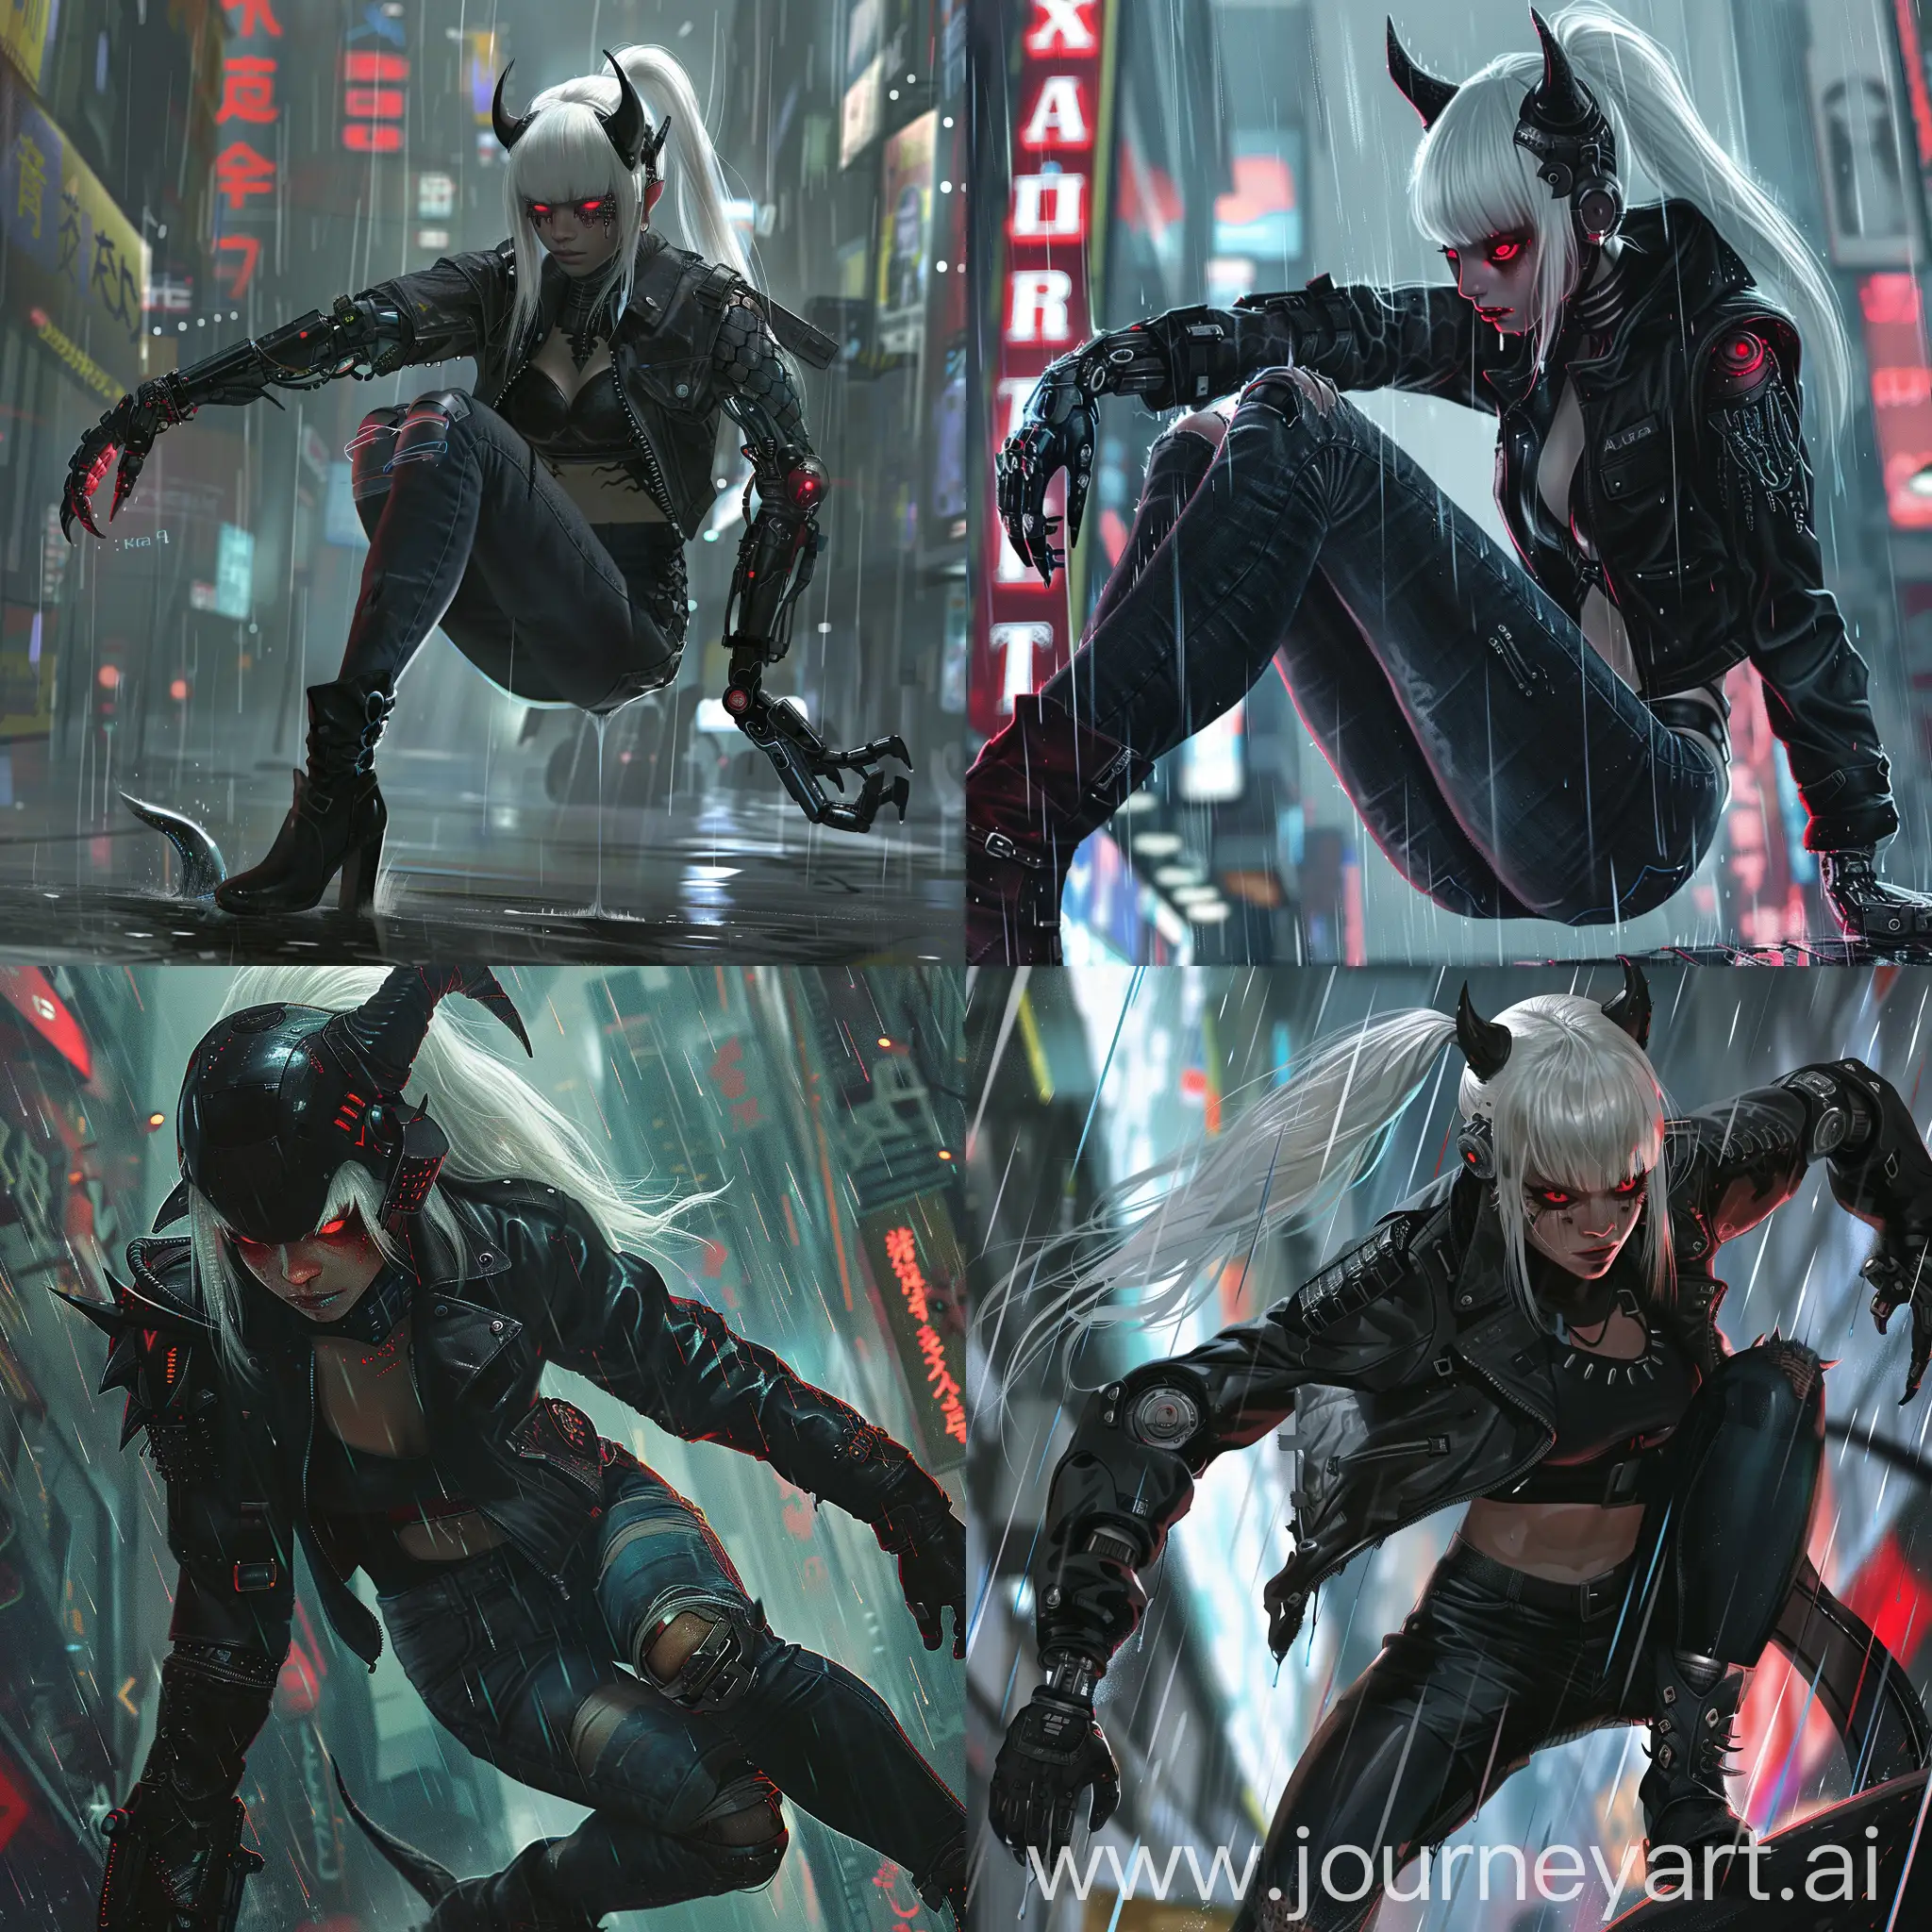 Cyberpunk-Au-Ra-Woman-with-Robotic-and-Demon-Arms-Sliding-in-Rainy-Cityscape